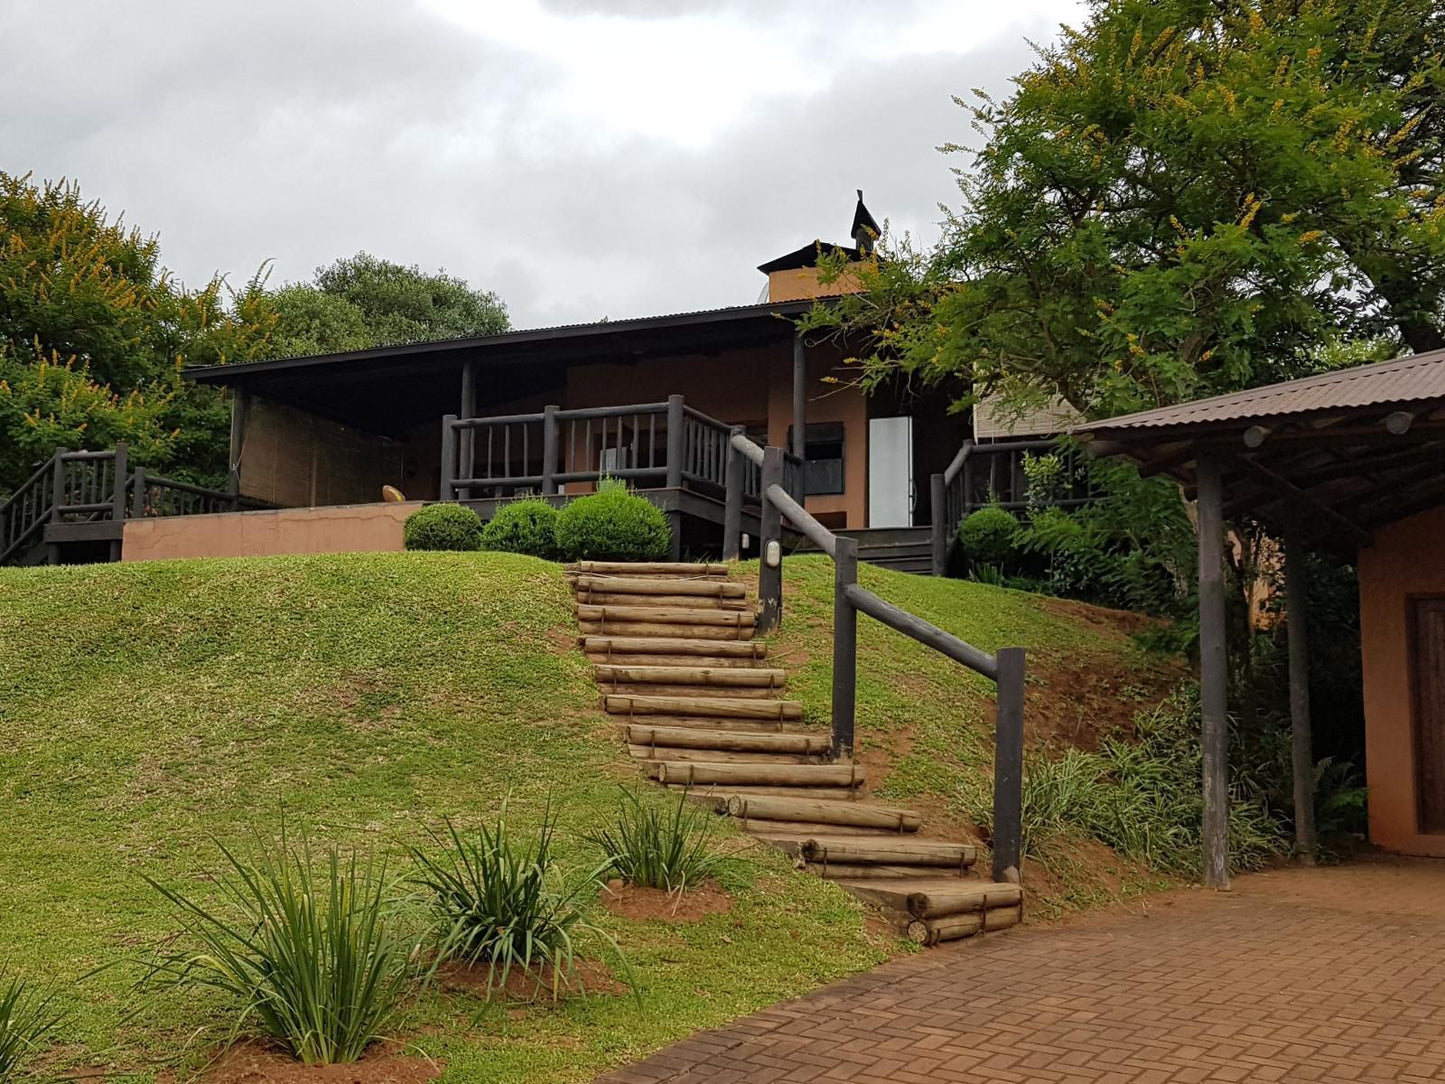 Dagama Lake Cottages Hazyview Mpumalanga South Africa House, Building, Architecture, Stairs